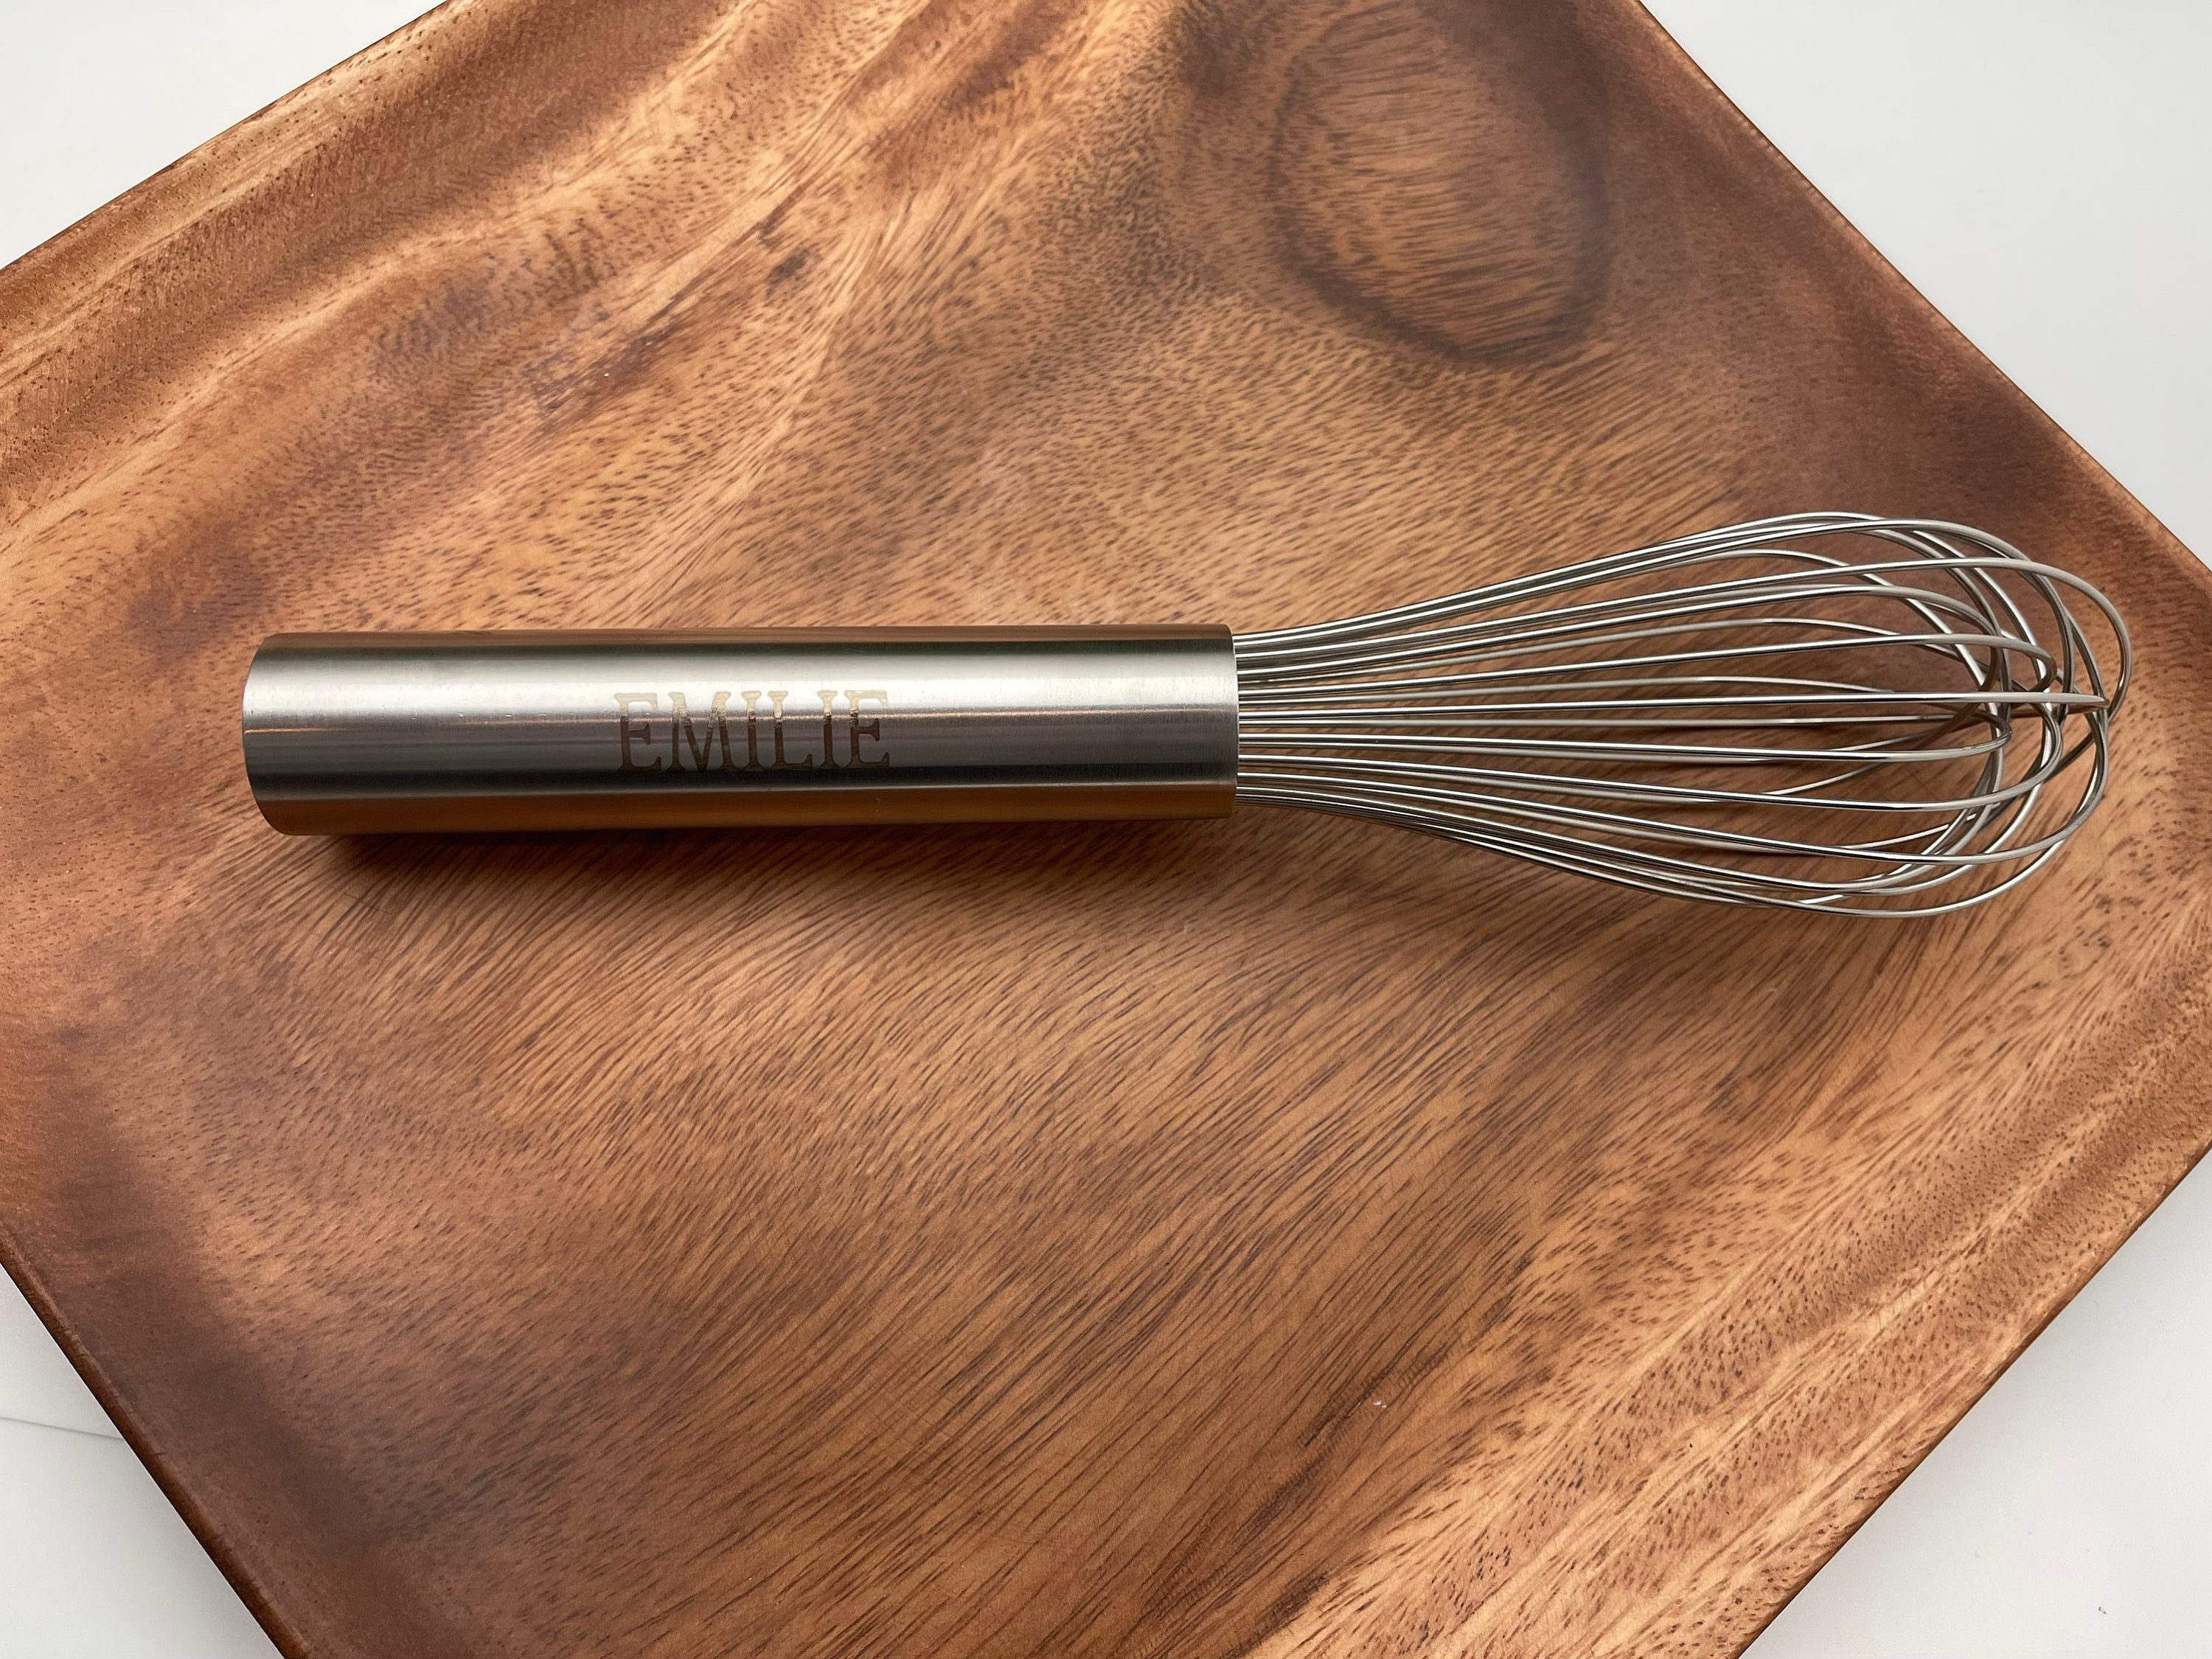 Custom Stainless Steel Whisk, Kitchen Whisk, Personalized Whisk